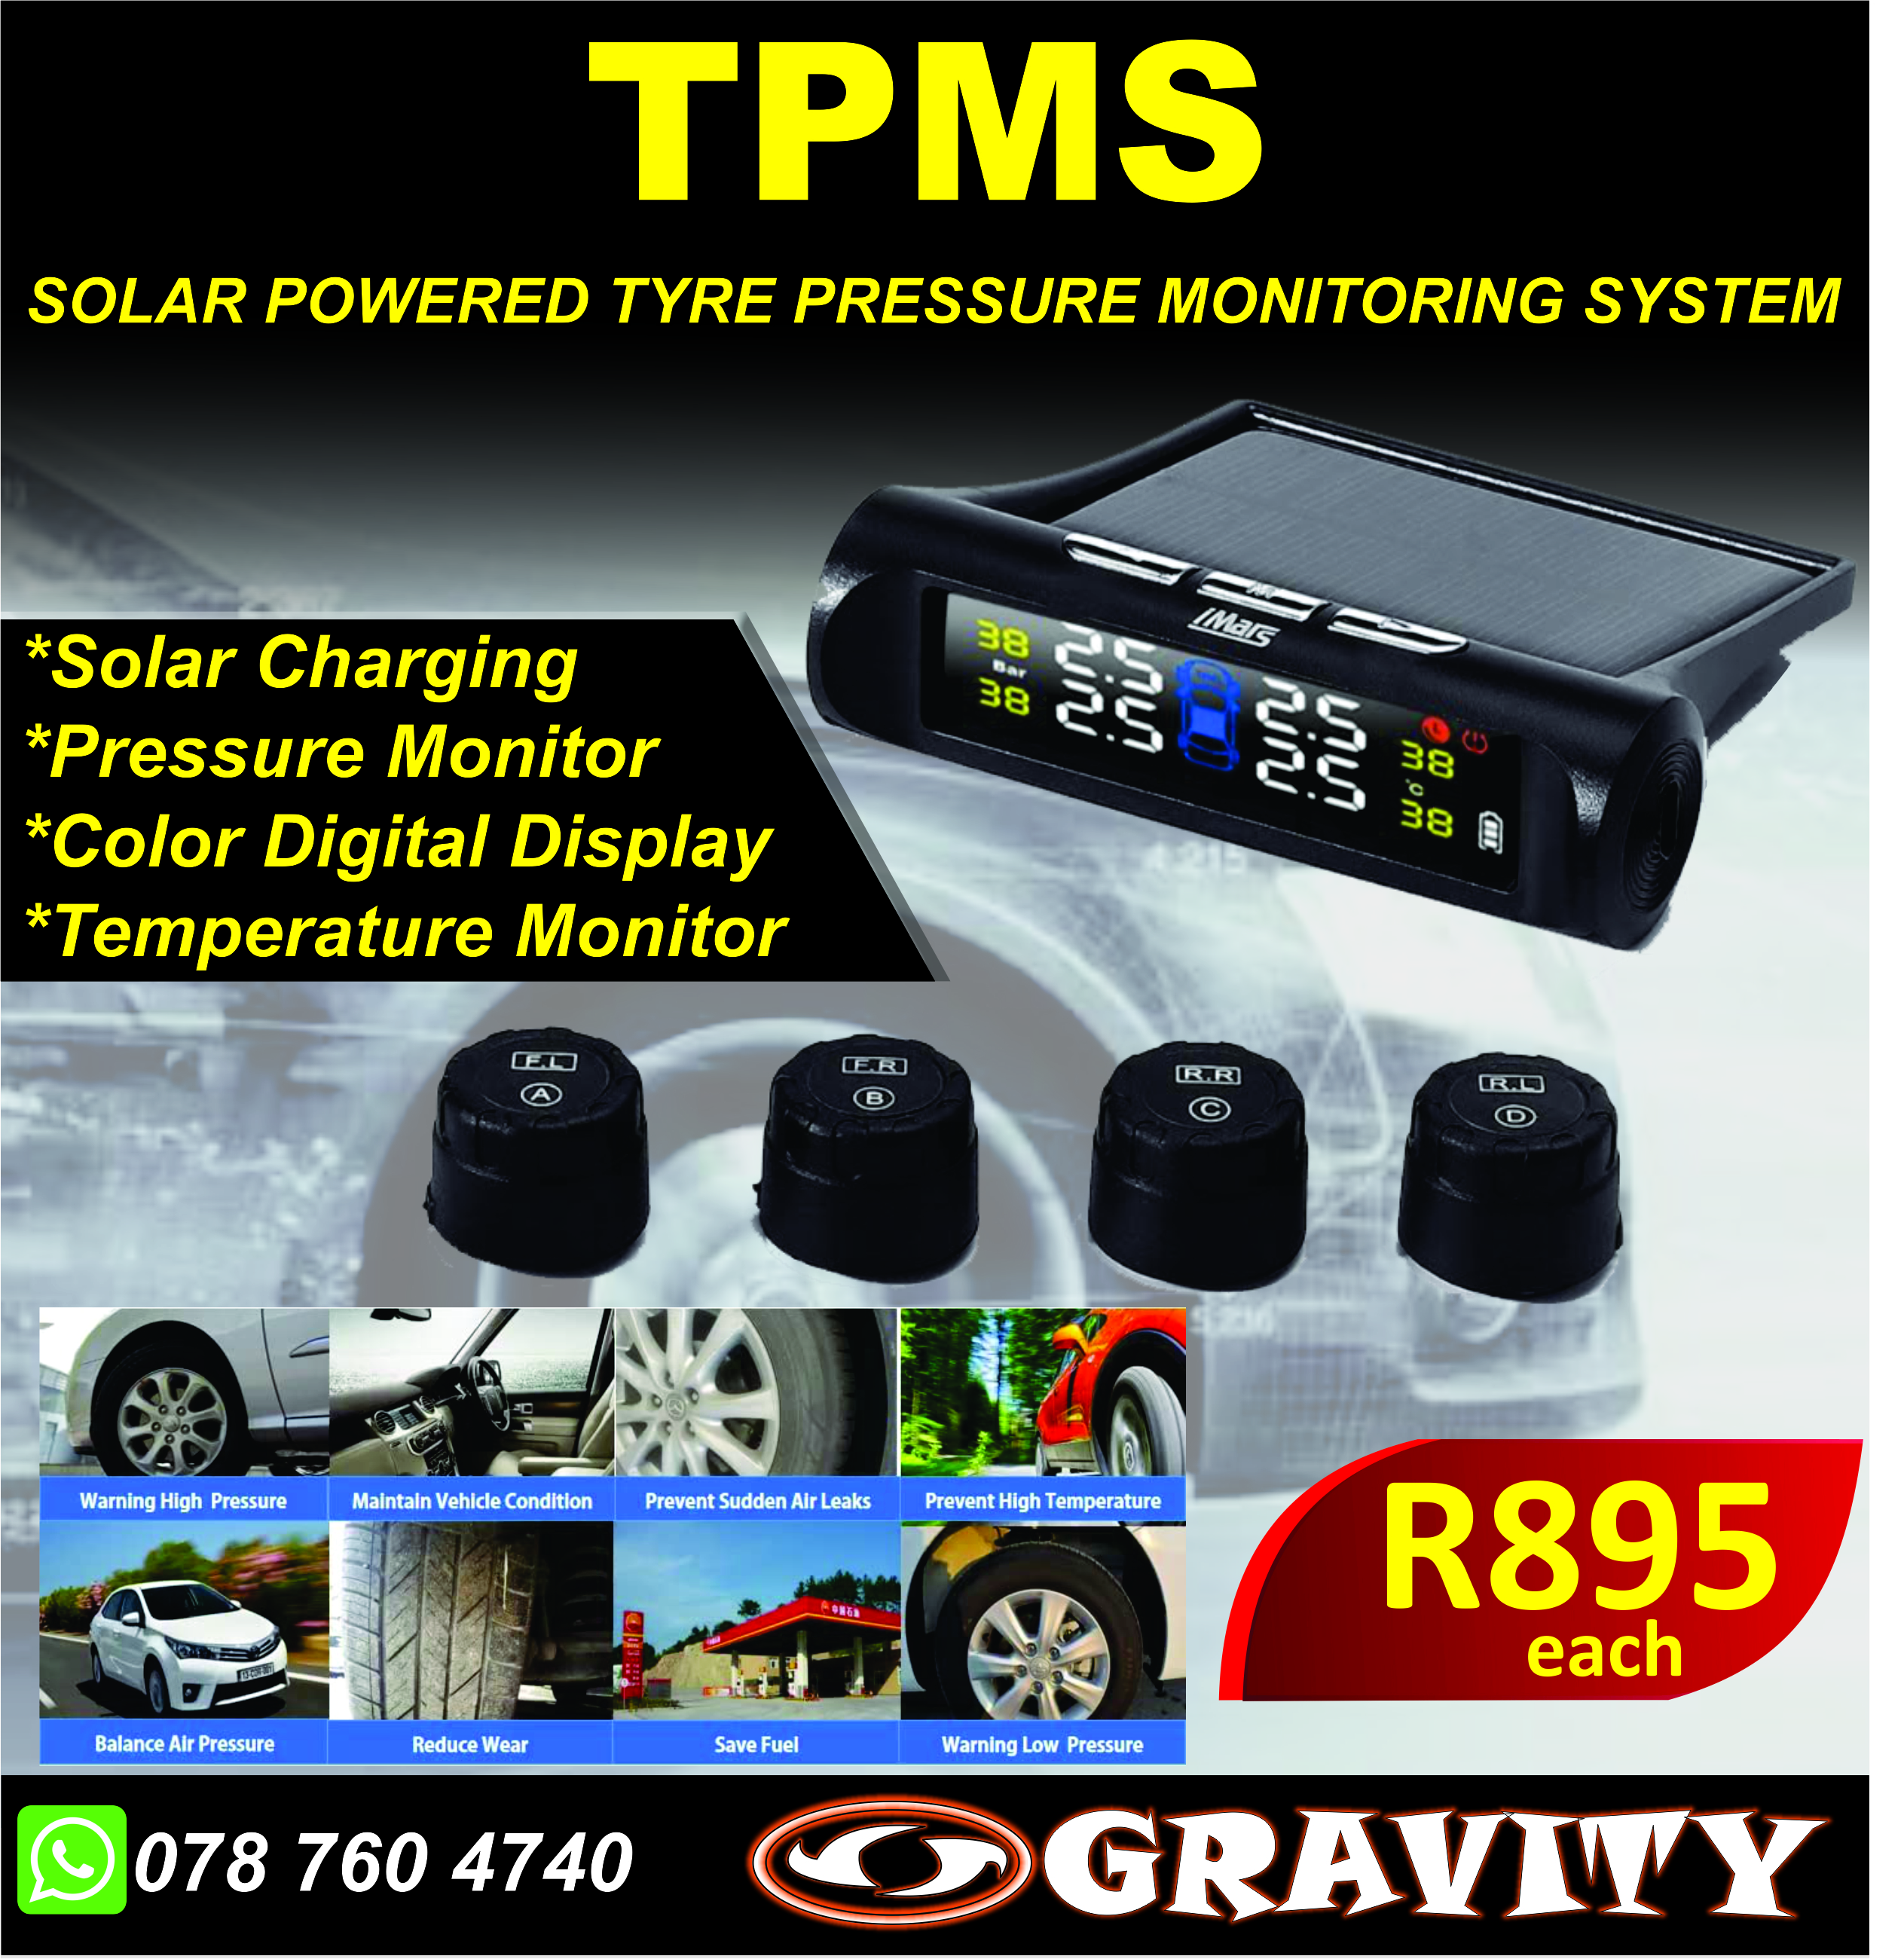 tpms | tyre pressure monitor | solar powered tyre pressure monitring system